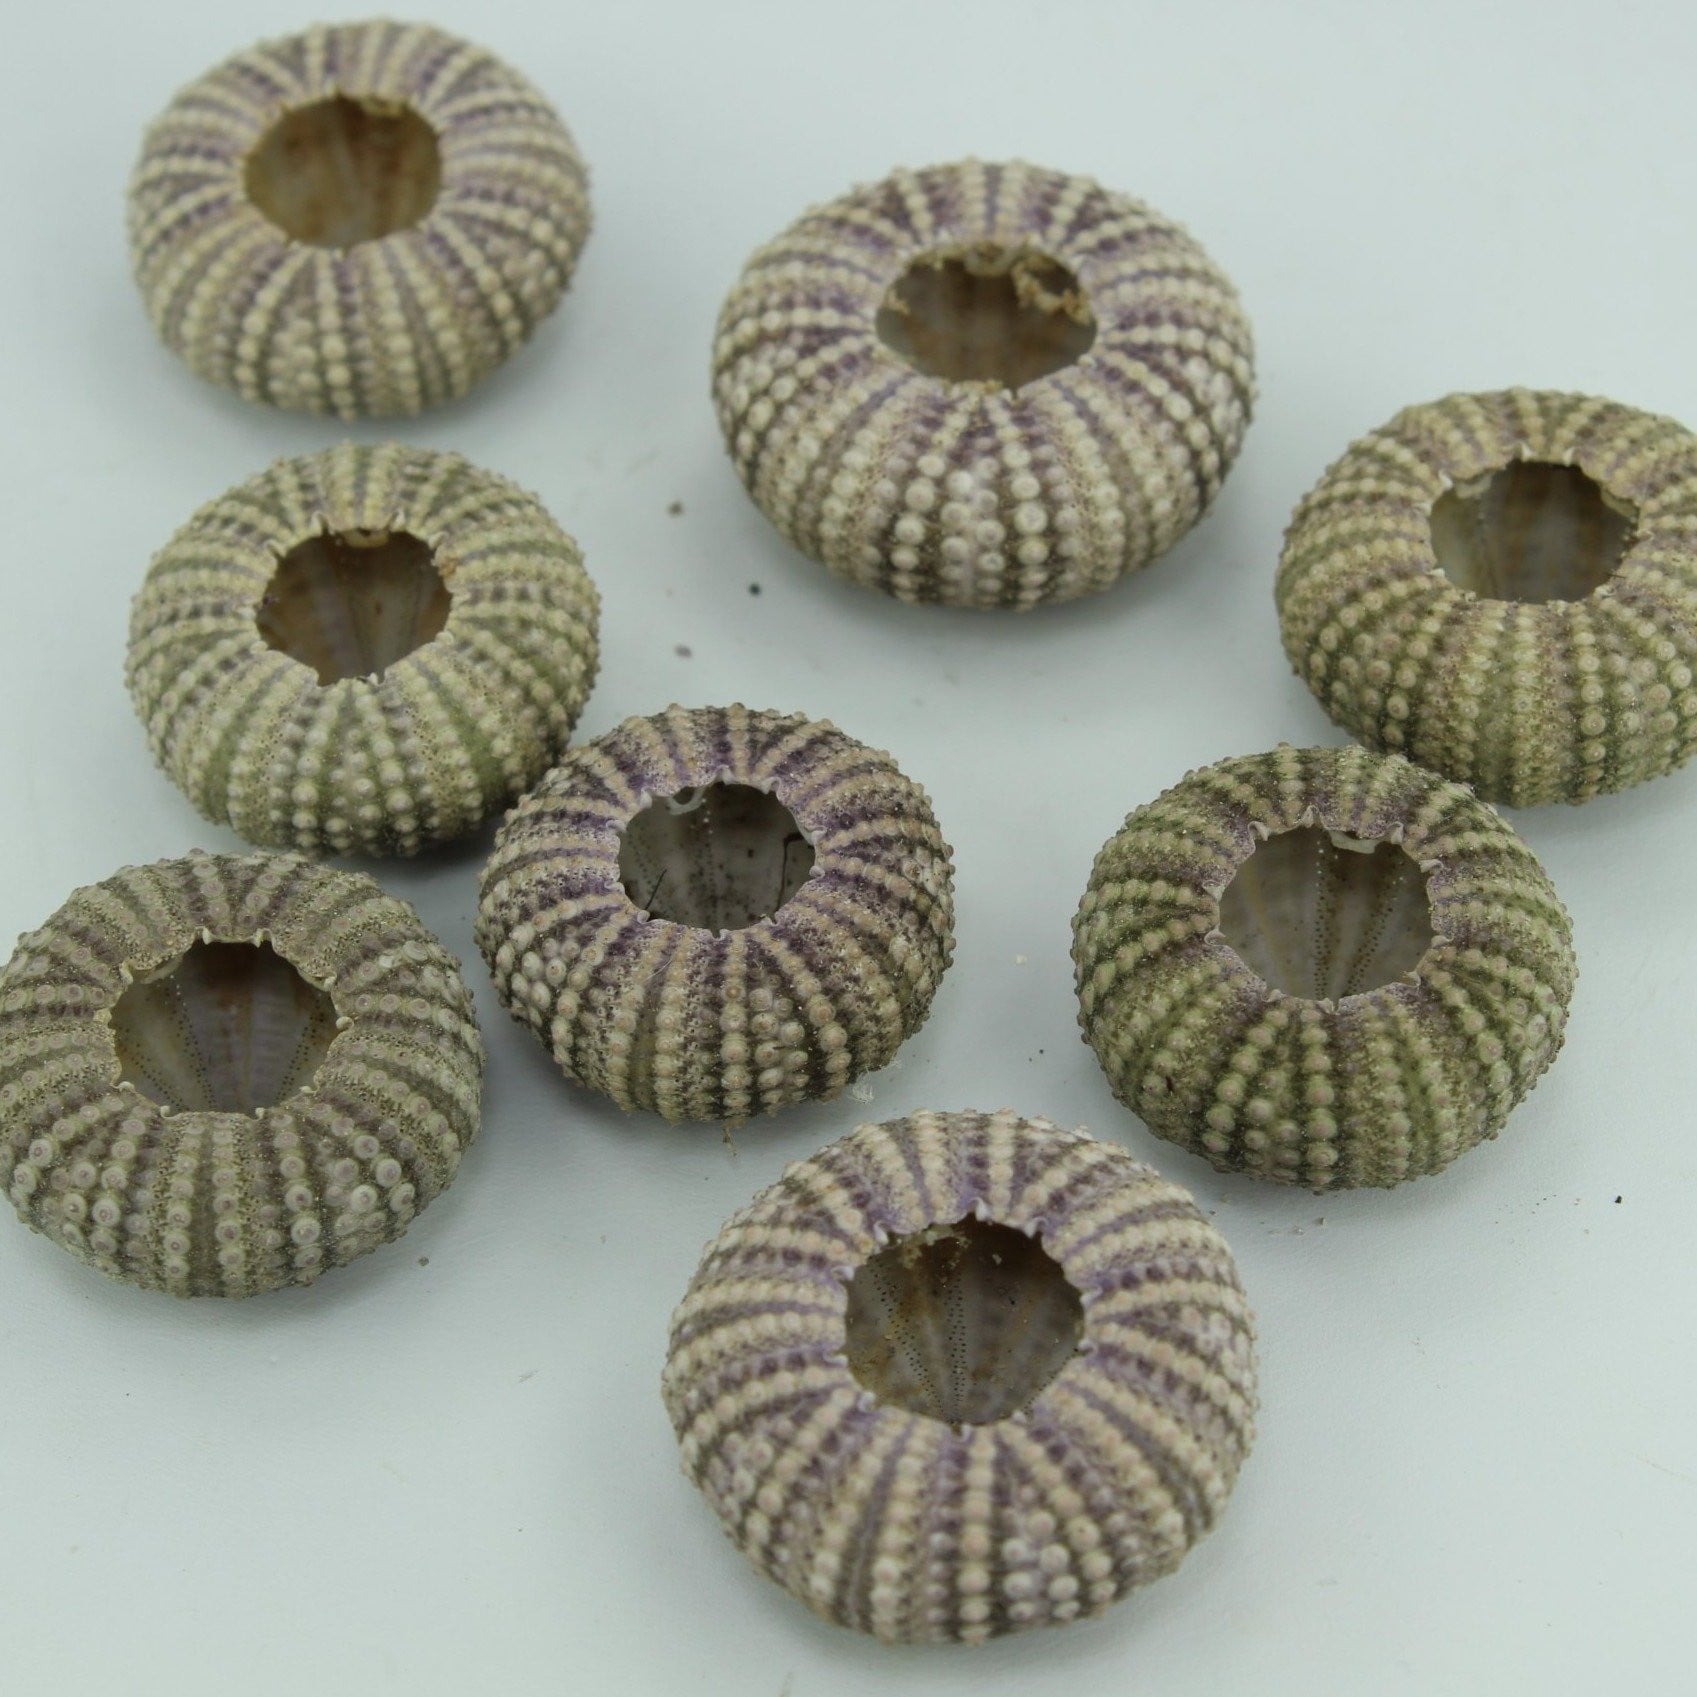 Florida Natural 8 Baby Sea Urchins Estate Collection Jewelry Shell Art Collectibles unusual